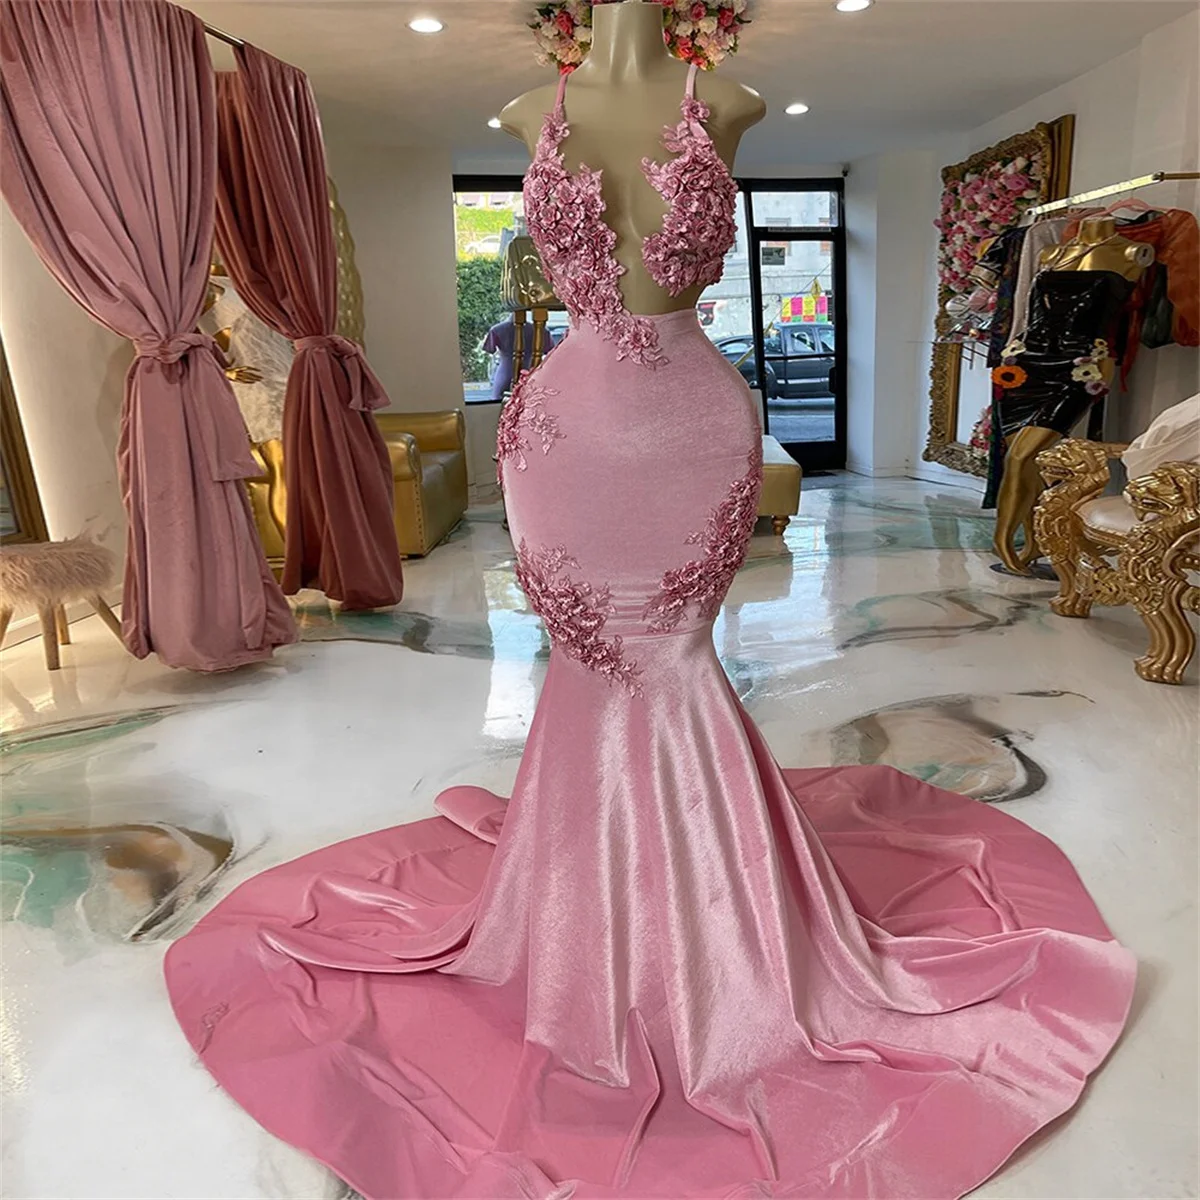 Fashion Pink Mermaid Wedding Dress Sexy Openwork Suspender Flower Lace Party Gown Pull-Pleated Fishtail Corduroy Fabric